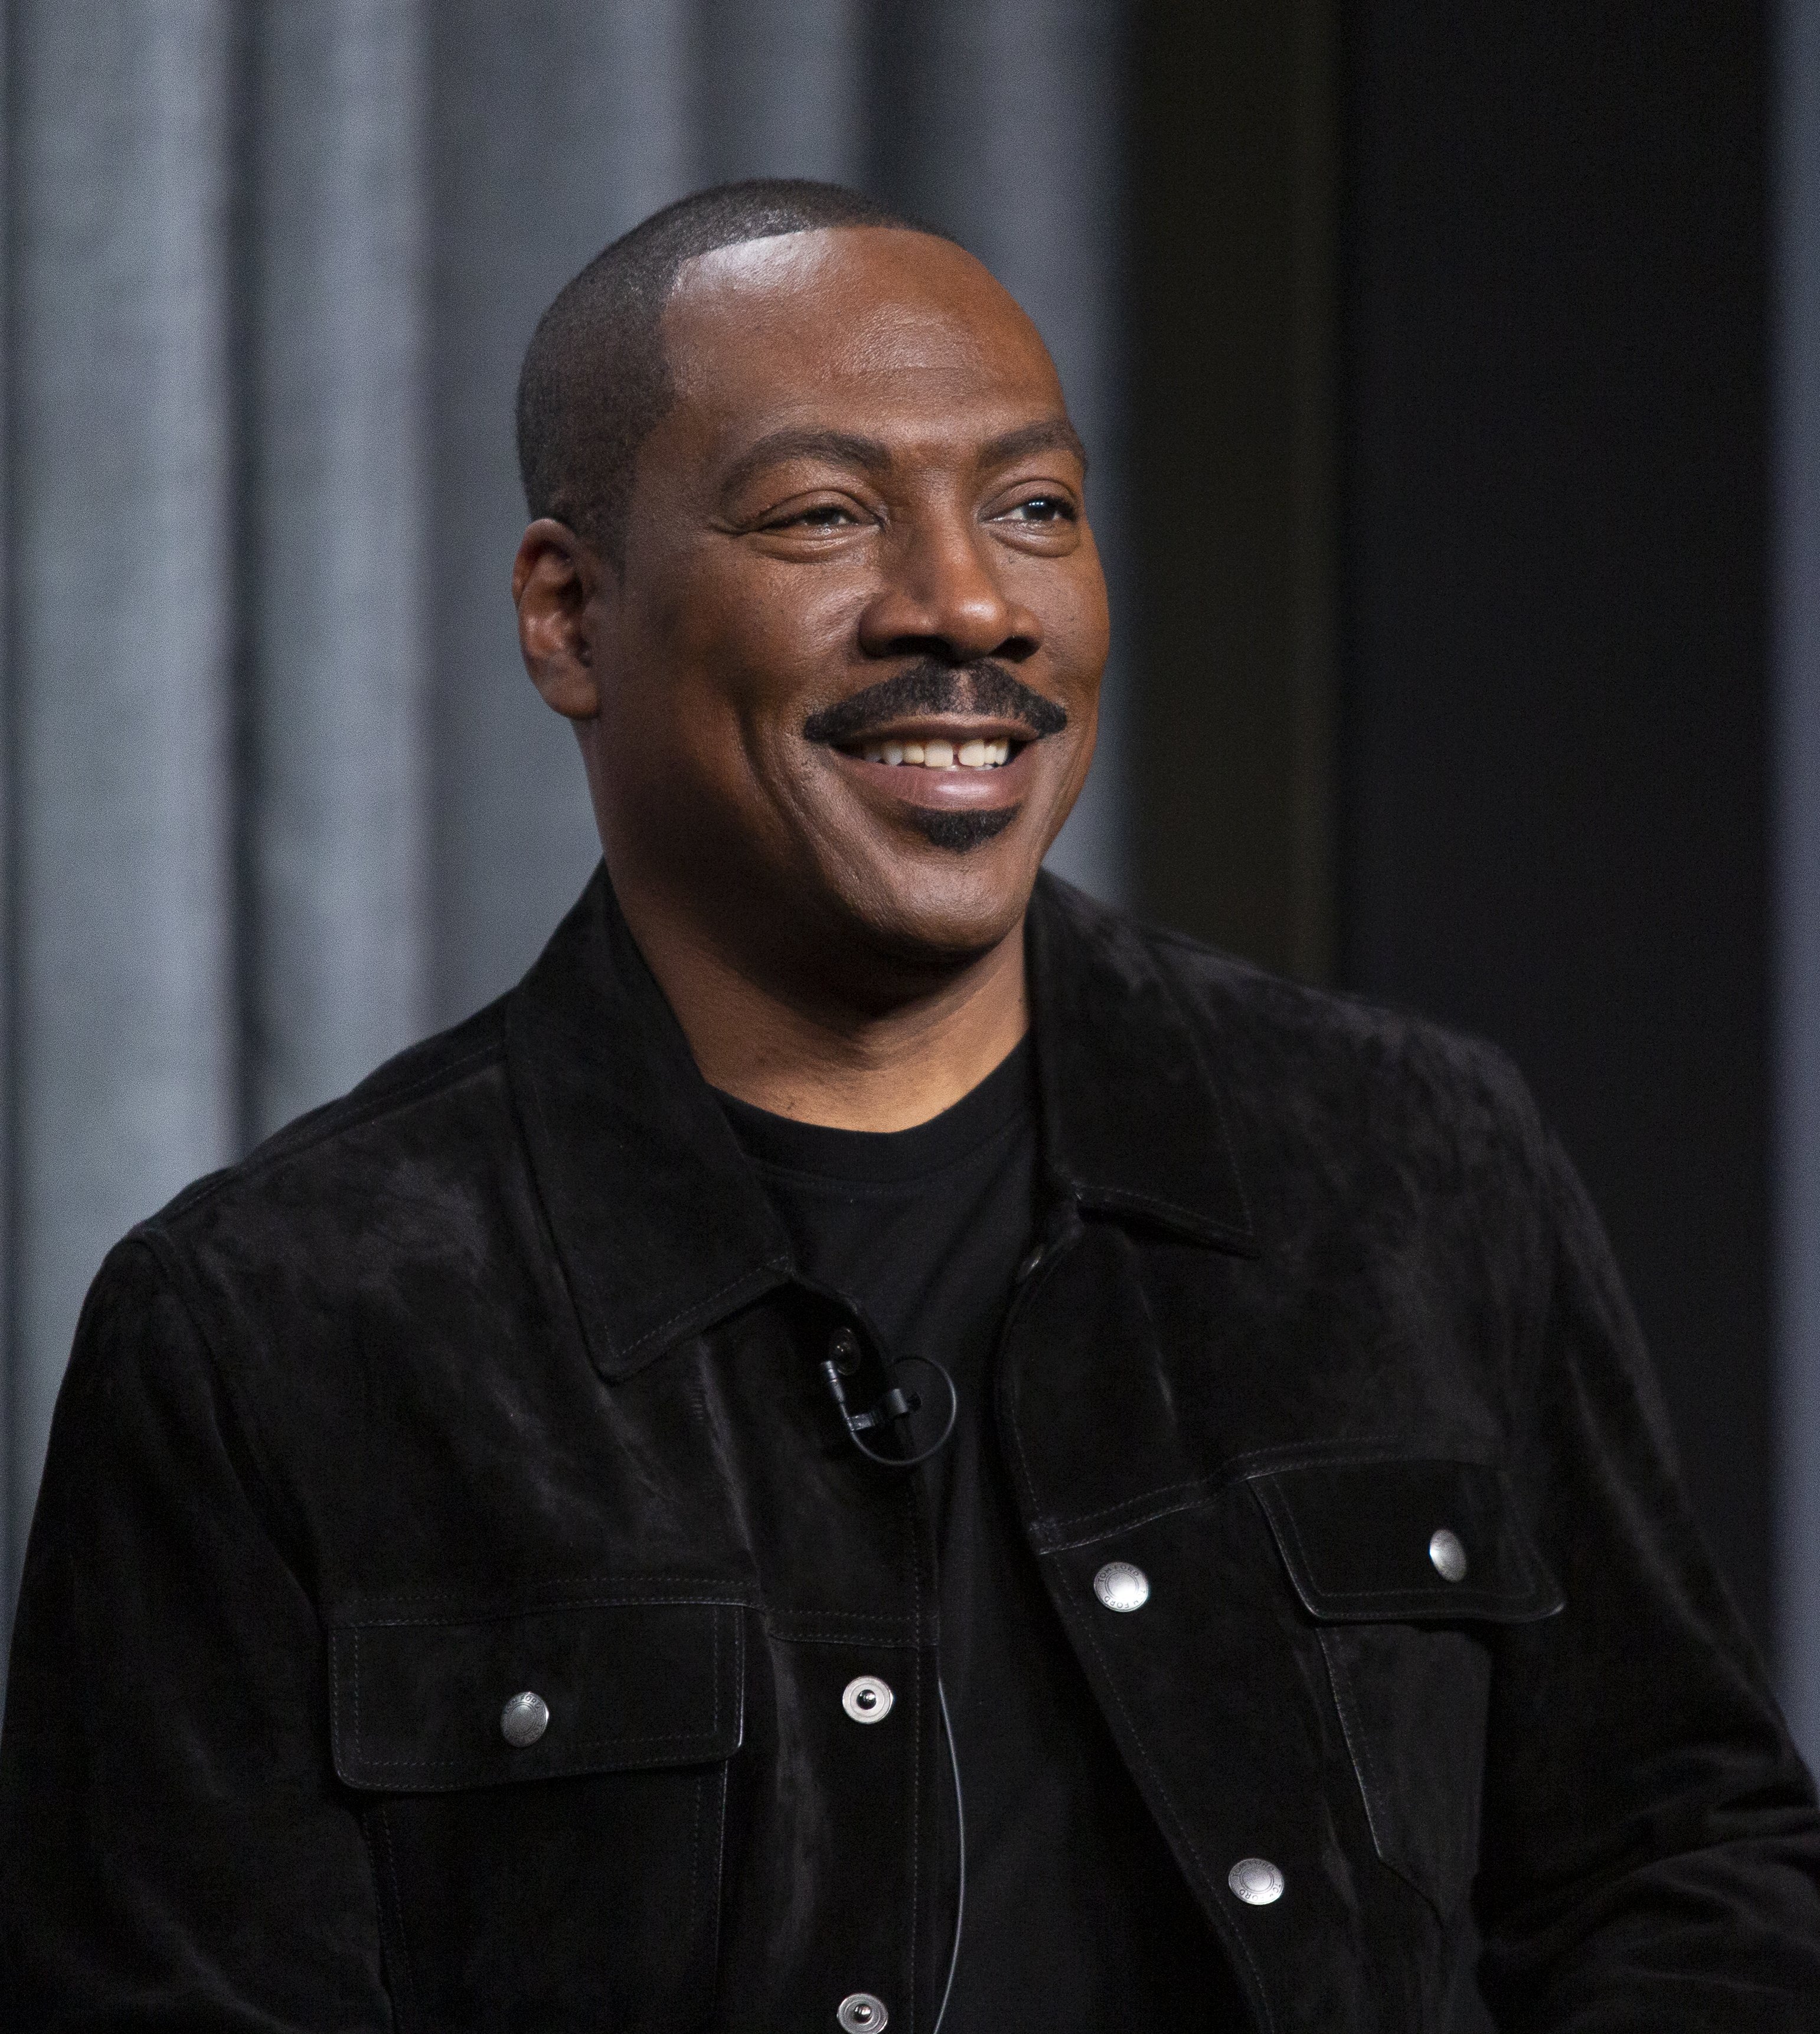  Eddie Murphy during his appearance on SAG-AFTRA Foundation's "Conversations" in  2019 in Los Angeles, California | Photo: Getty Images 